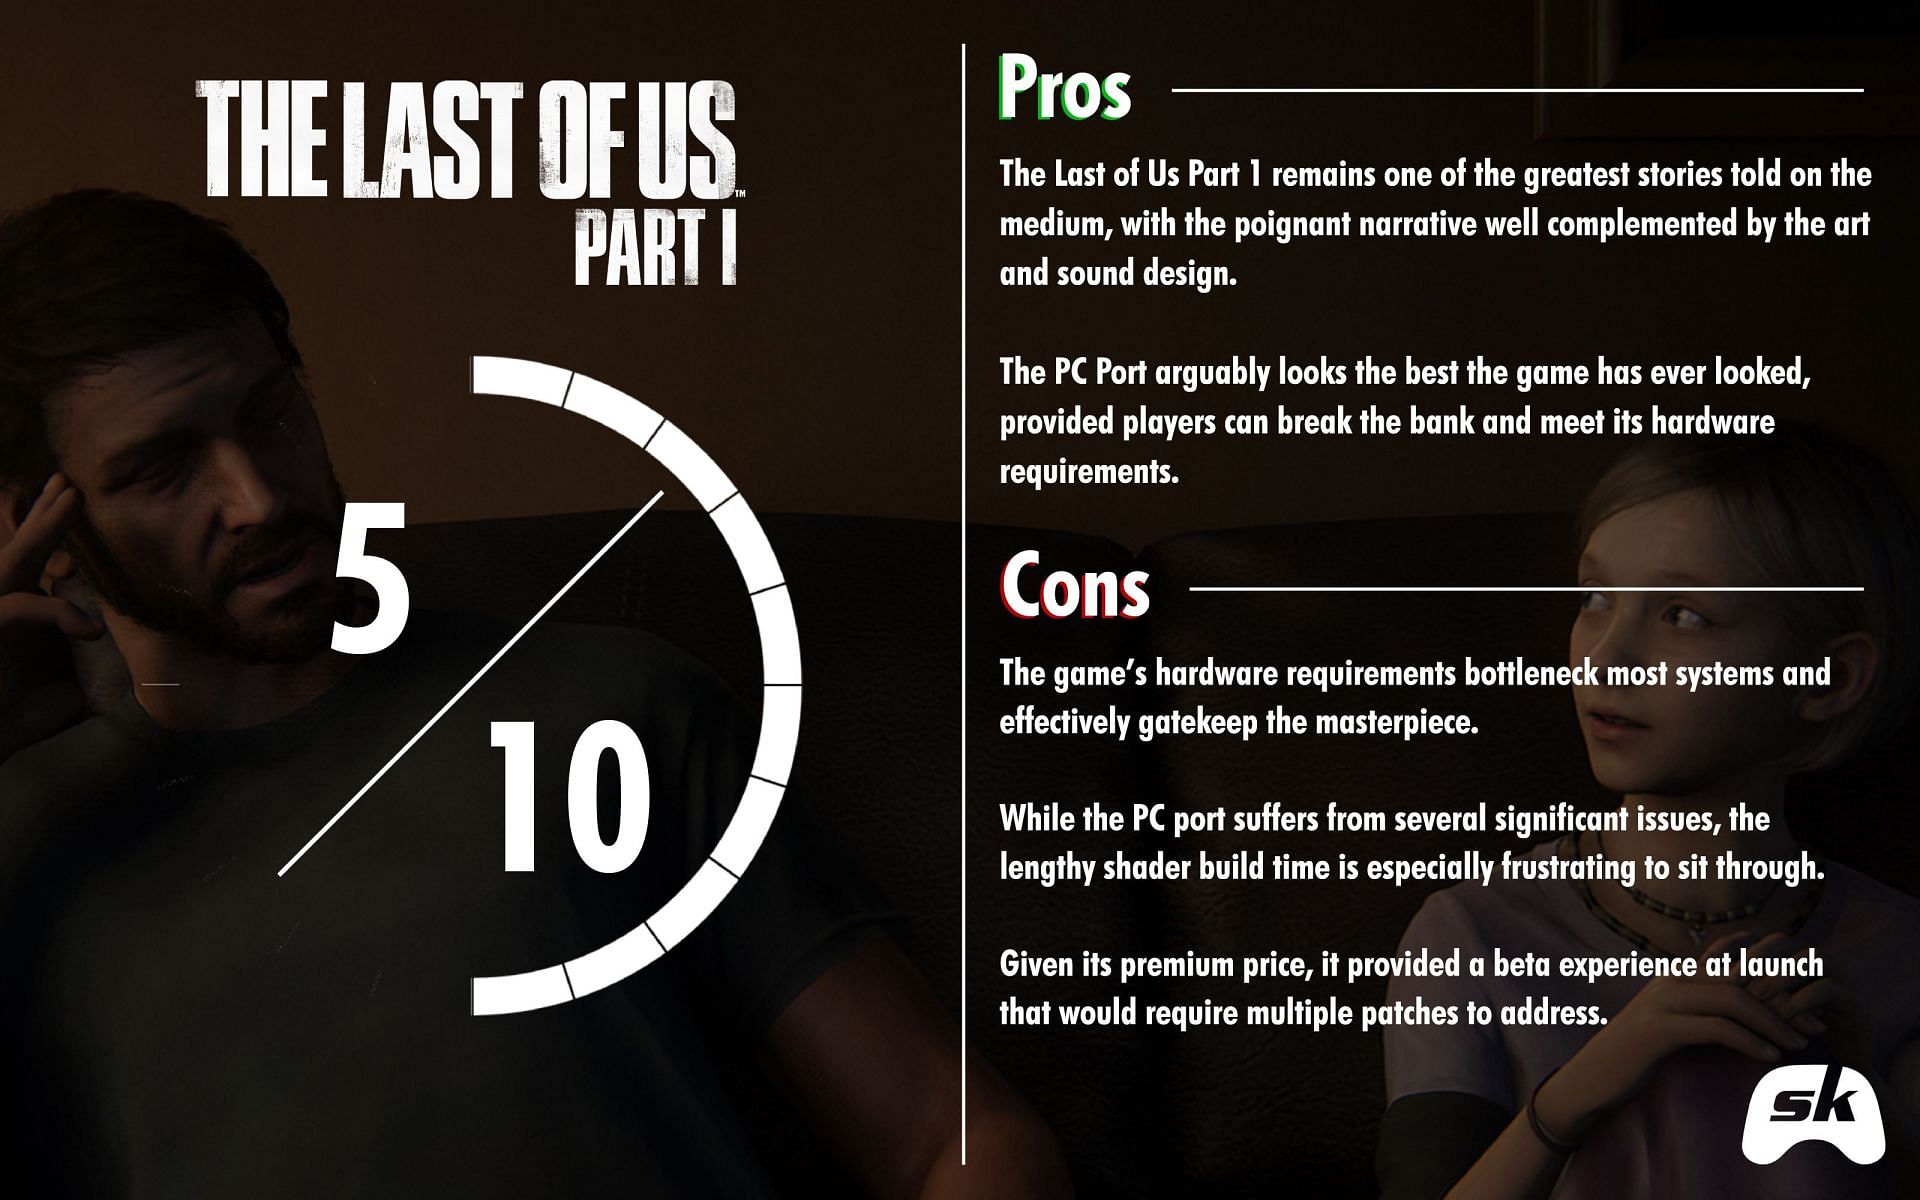 The Last of Us Part 1: What are the PC requirements?